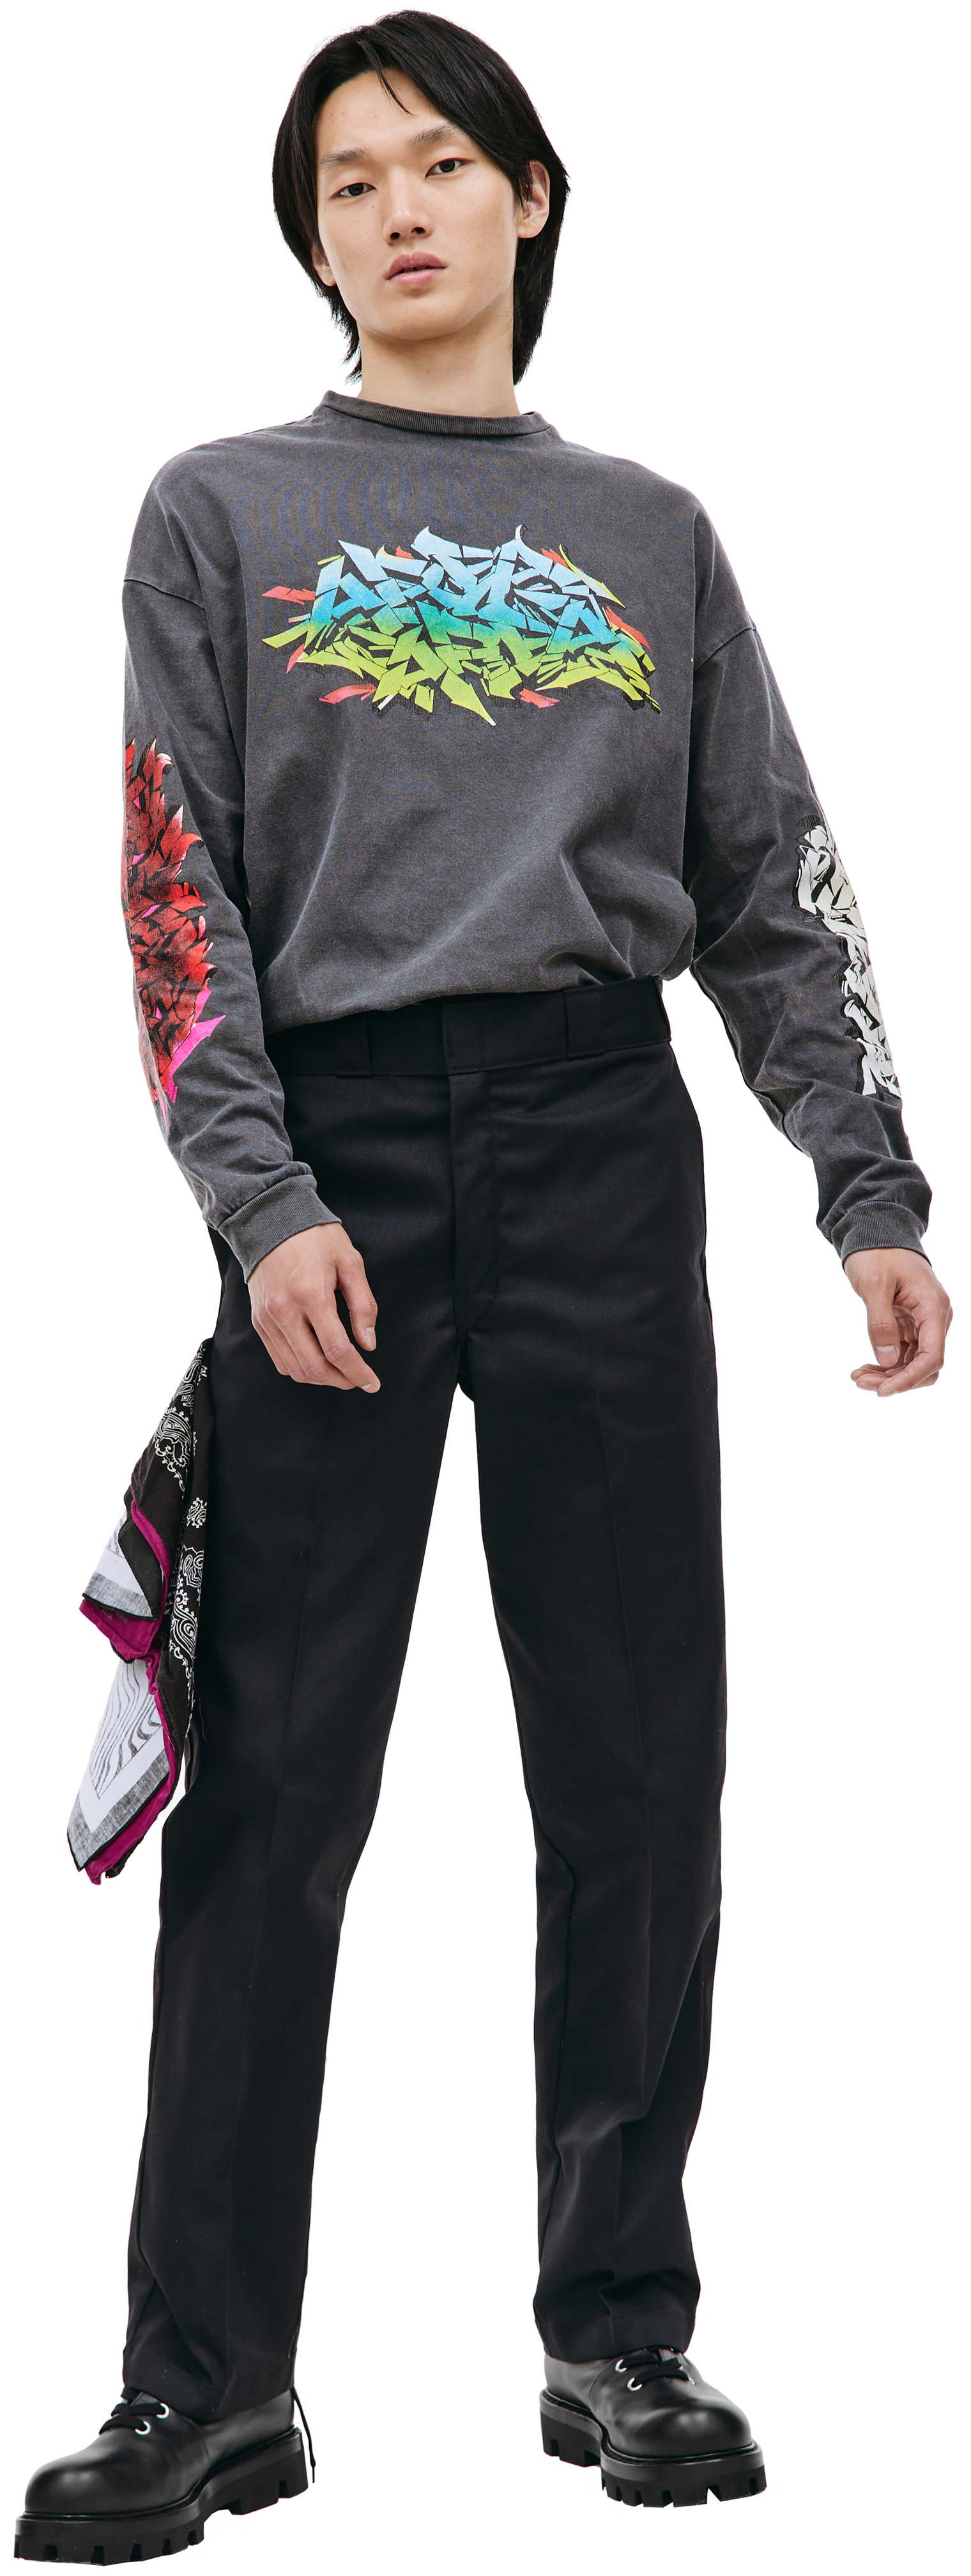 Children of the discordance Black trousers with bandana